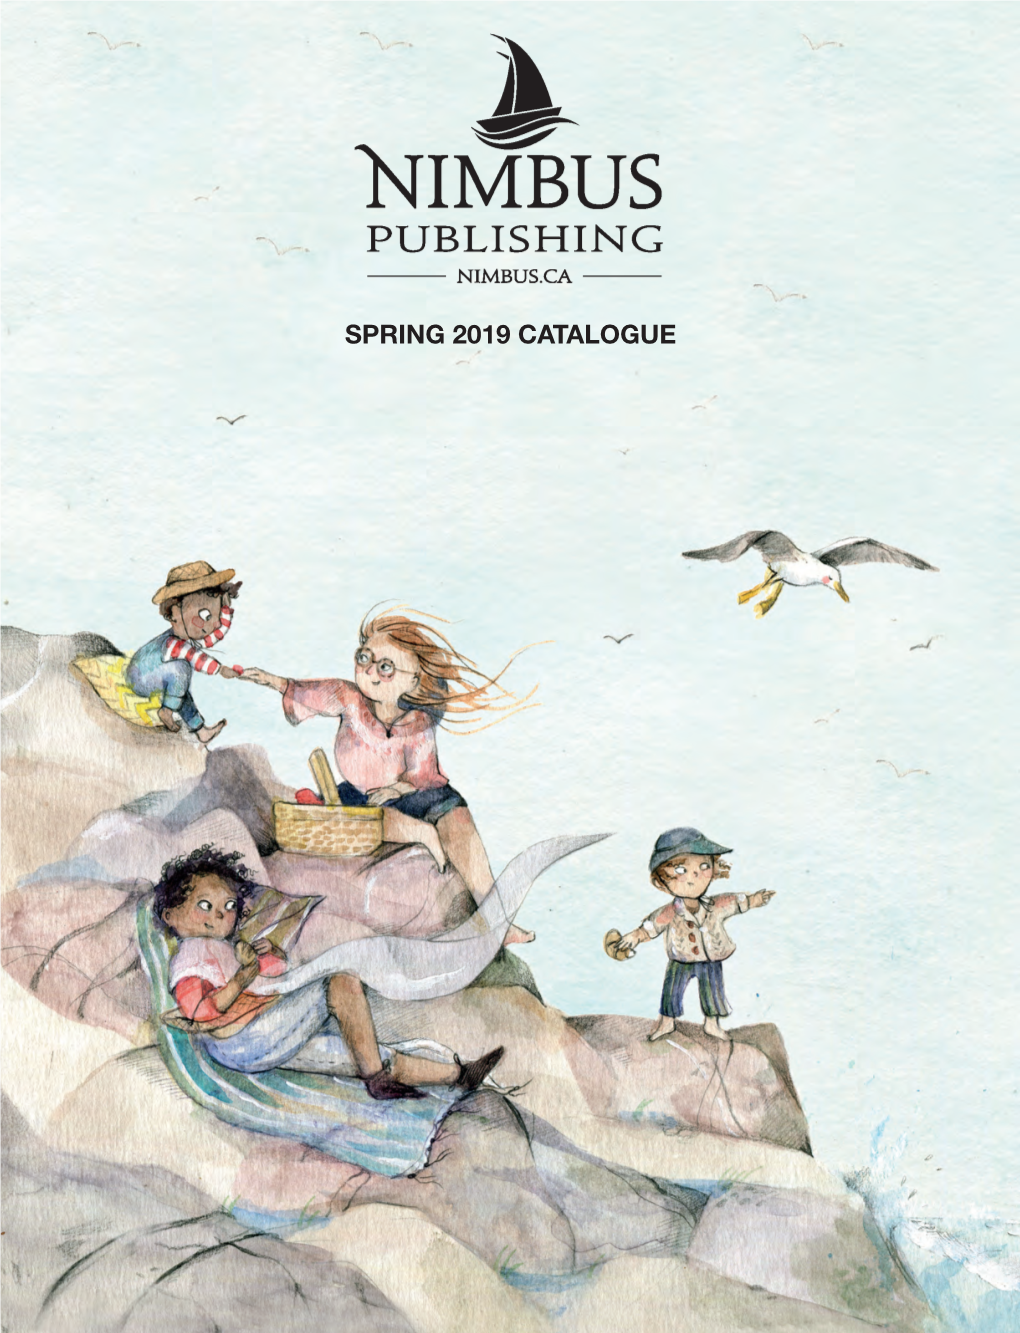 SPRING 2019 CATALOGUE Have You Heard a Good Book Lately? Nimbus Audio Is Pleased to Present Our Latest Books for Your Listening Pleasure